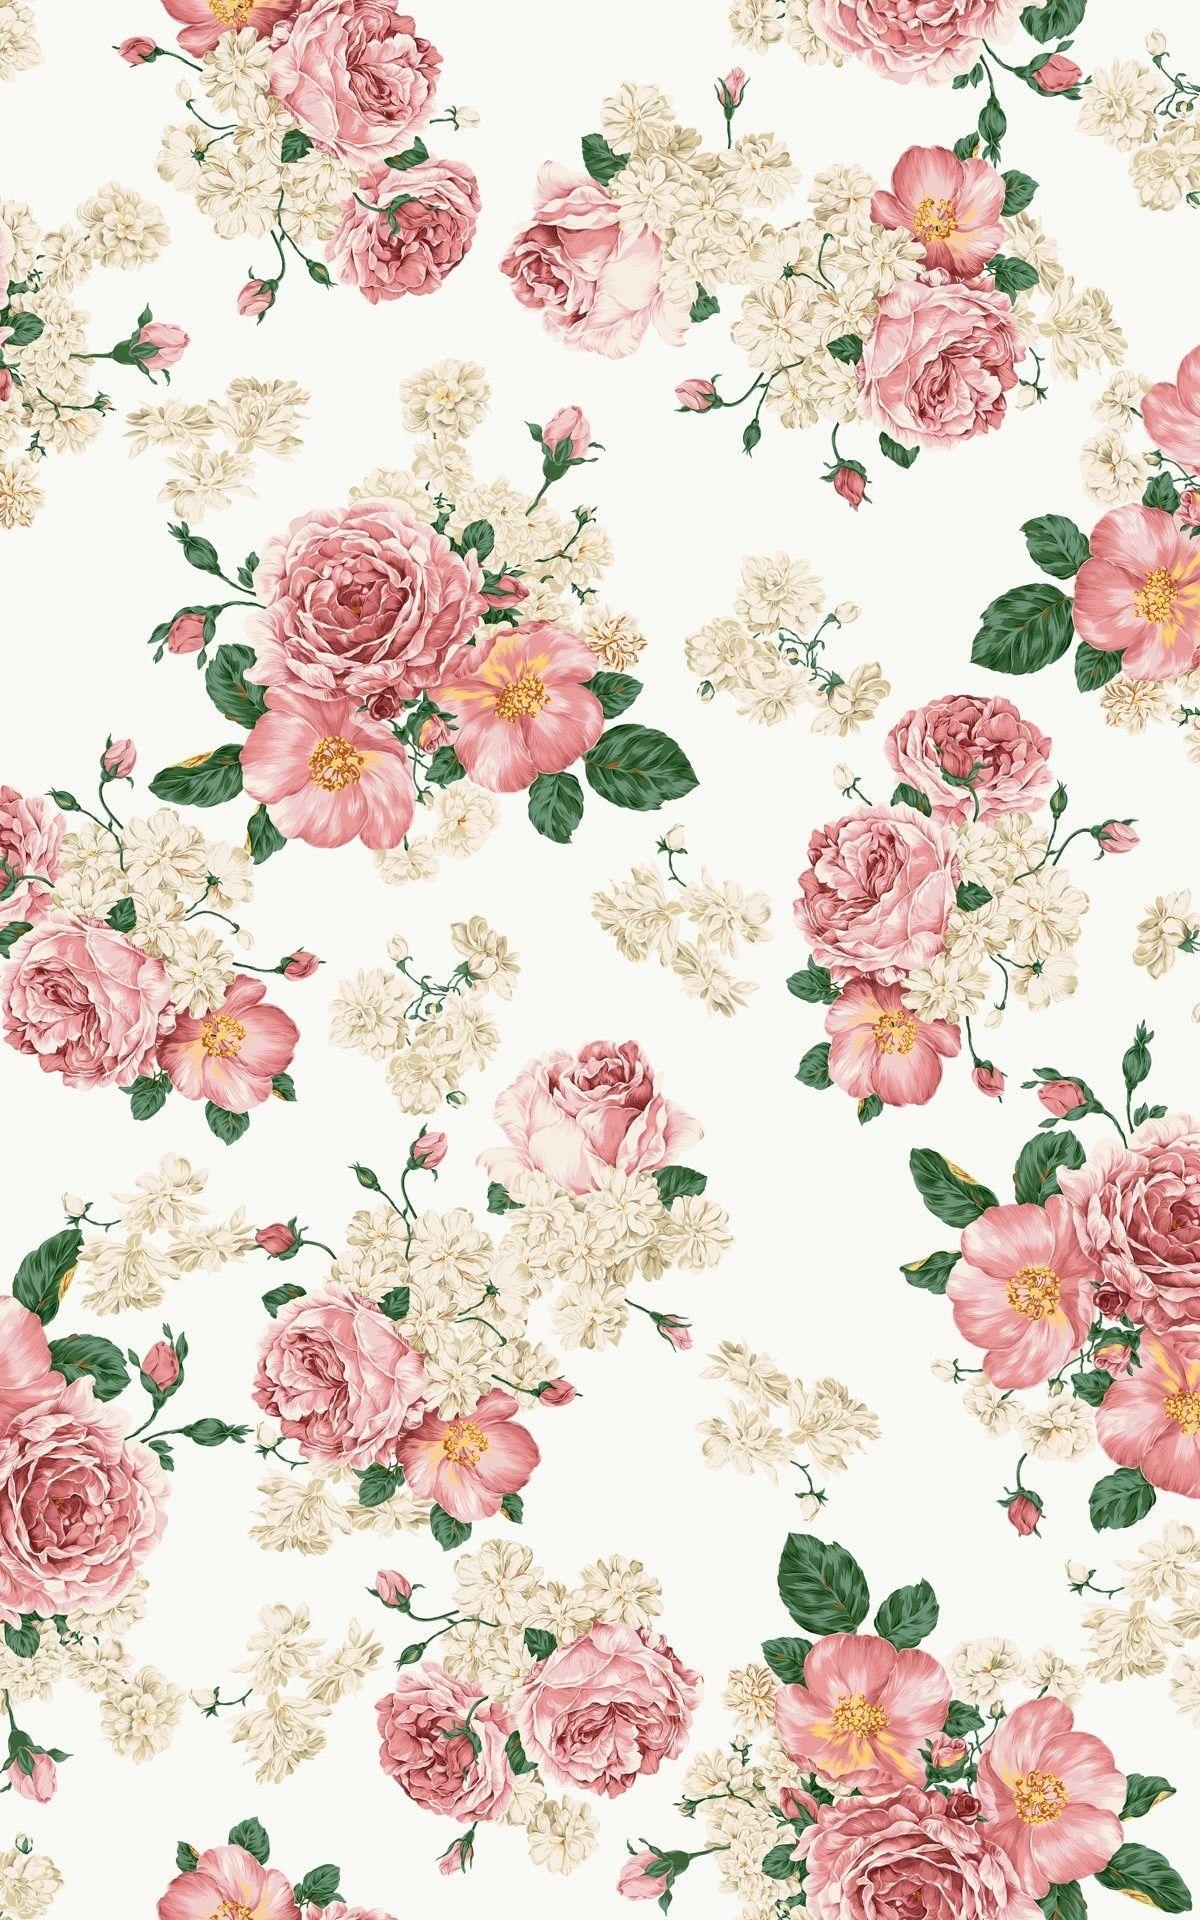 iPhone background tumblr floral 4382416